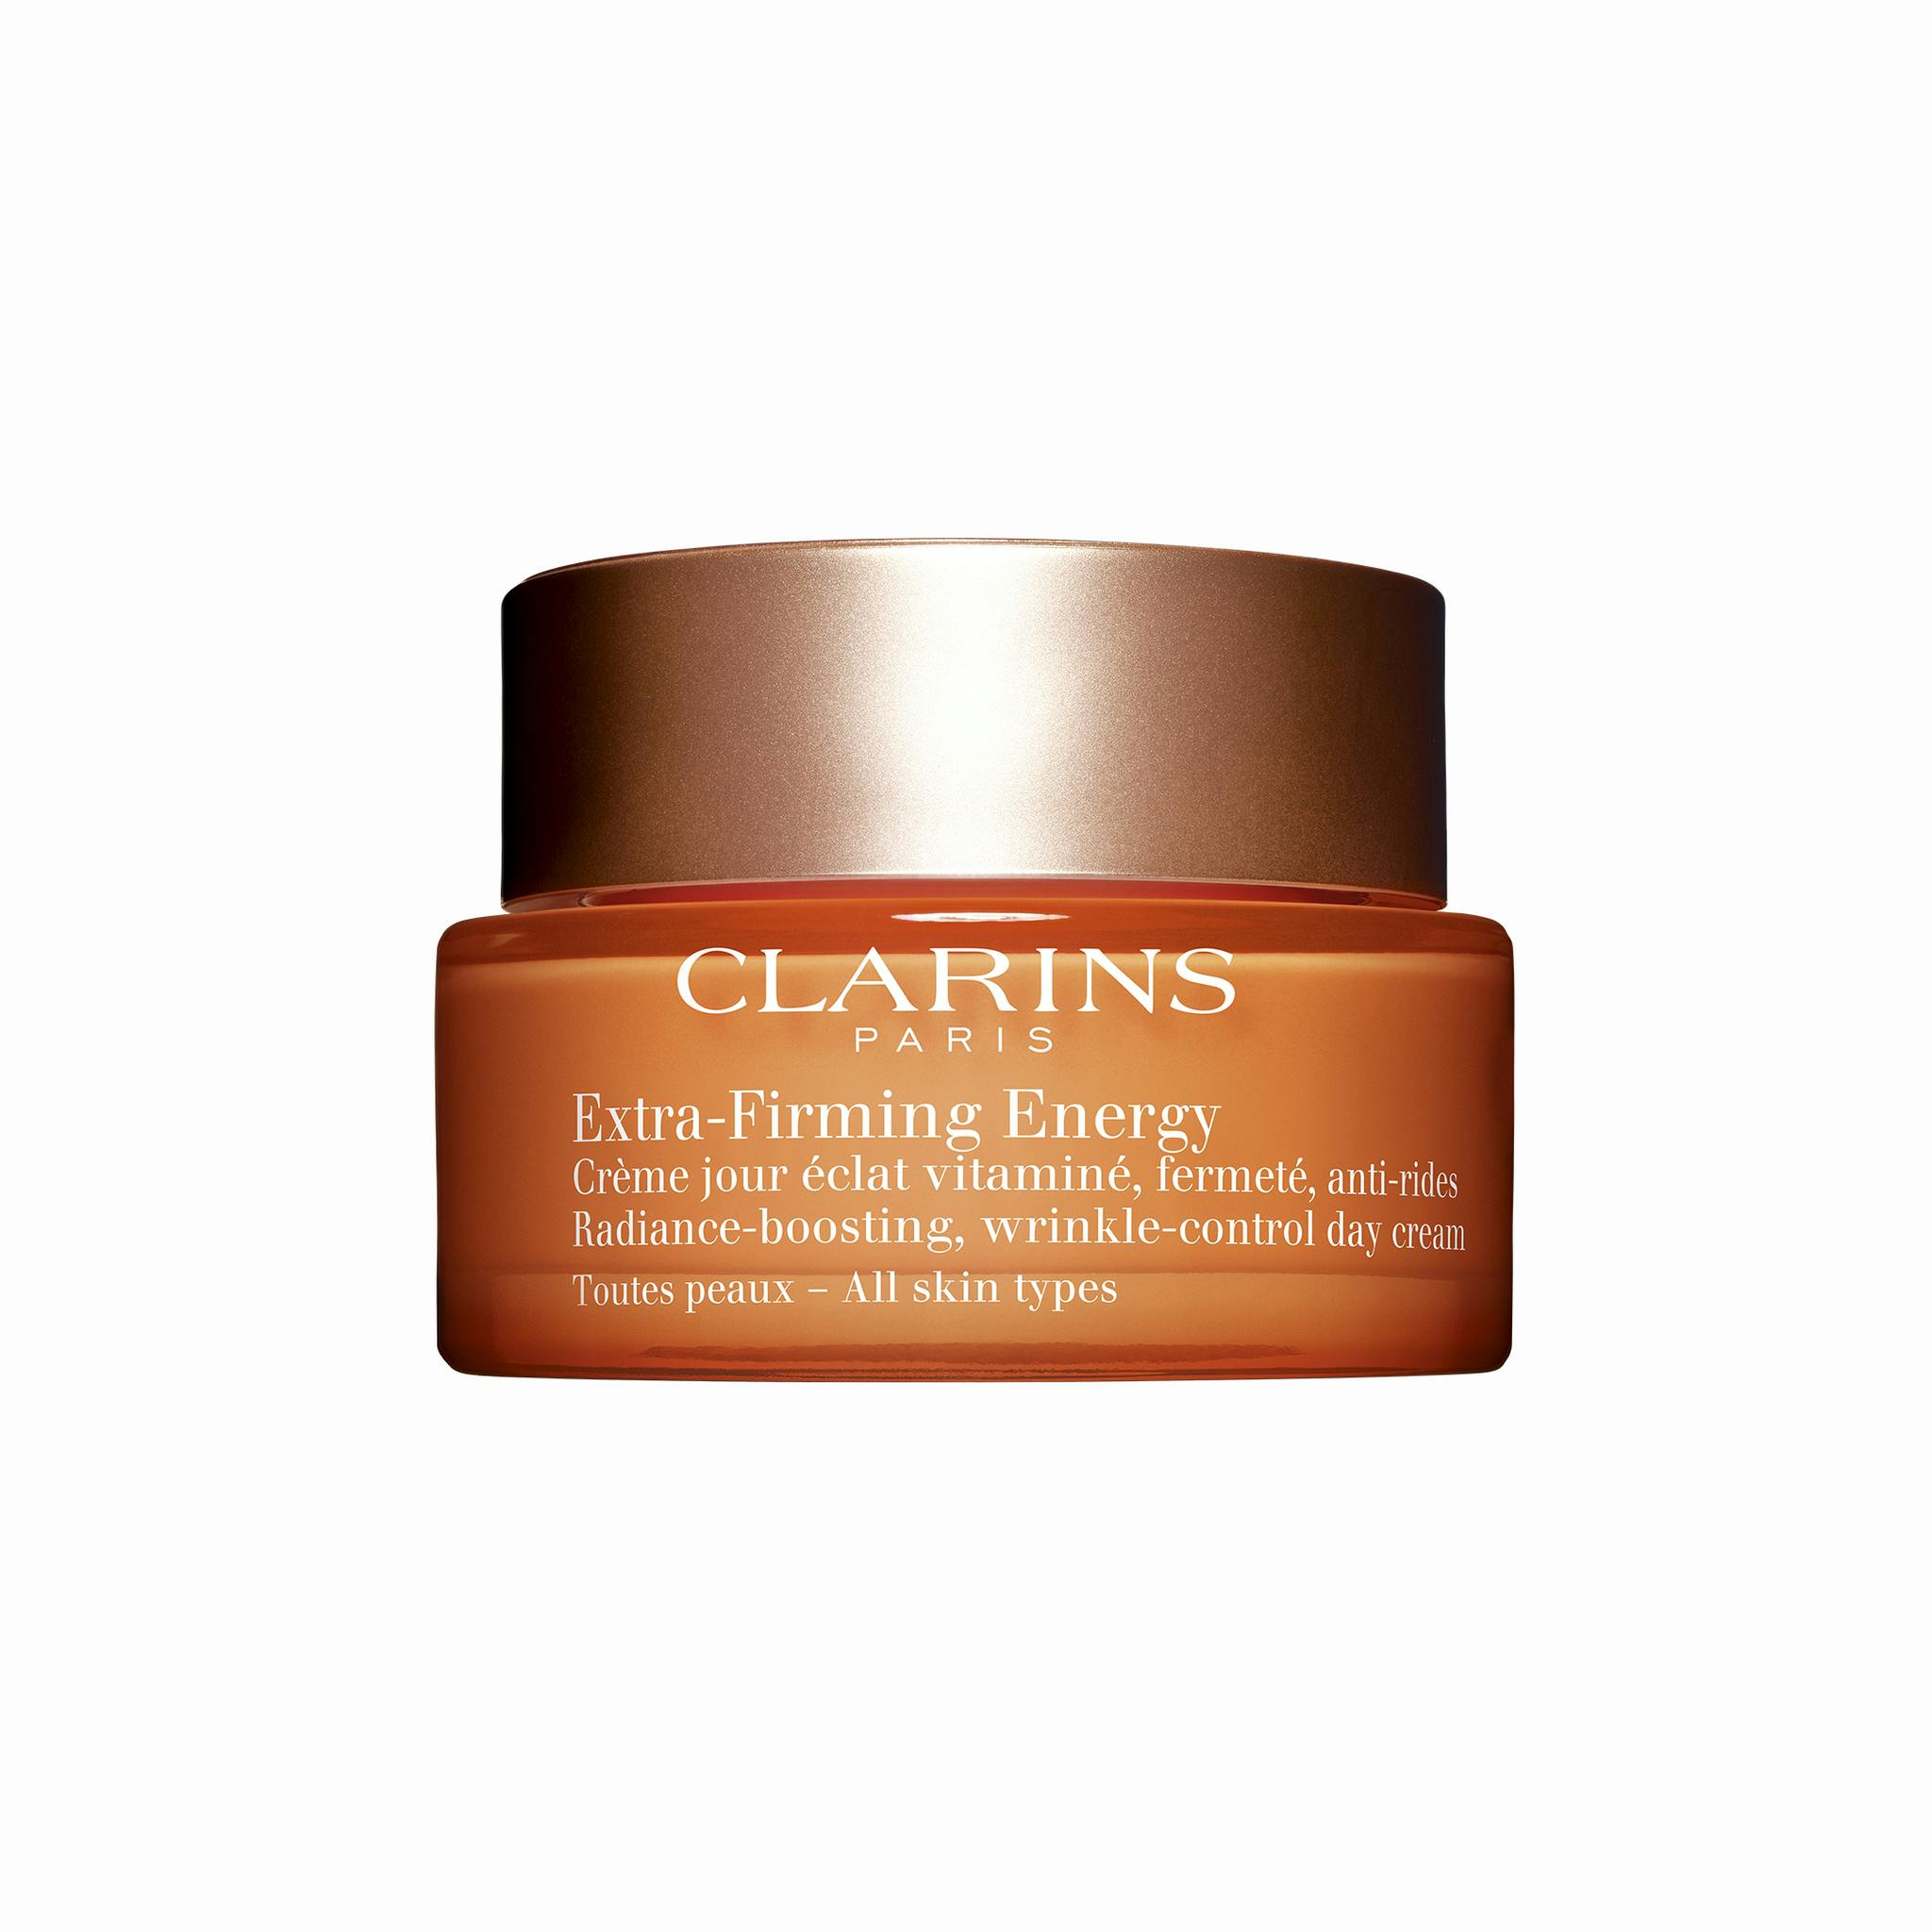 Clarins Extra-Firming Energy, 50 ml